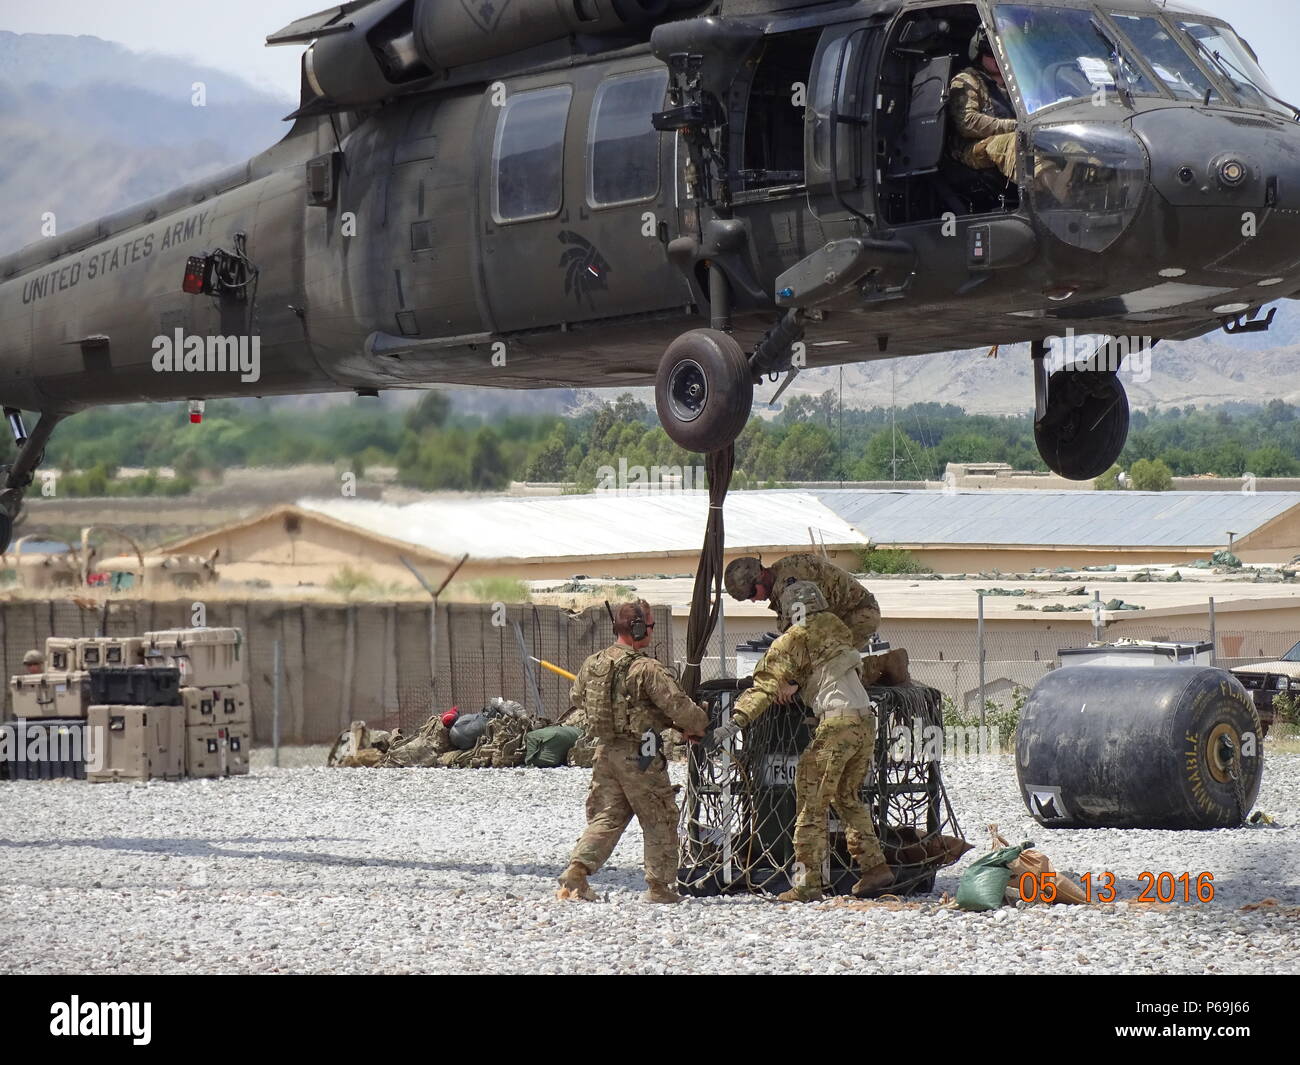 A UH-60 Black Hawk helicopter sling loads equipment from Forward Operating Base Joyce, Afghanistan, May 13, 2016. The 40th CAB sent a team of Washington and California Army National Guard fuelers to eastern Afghanistan to support the Afghan aviation mission. (Photo courtesy of Spc. Jeremy Miller) Stock Photo